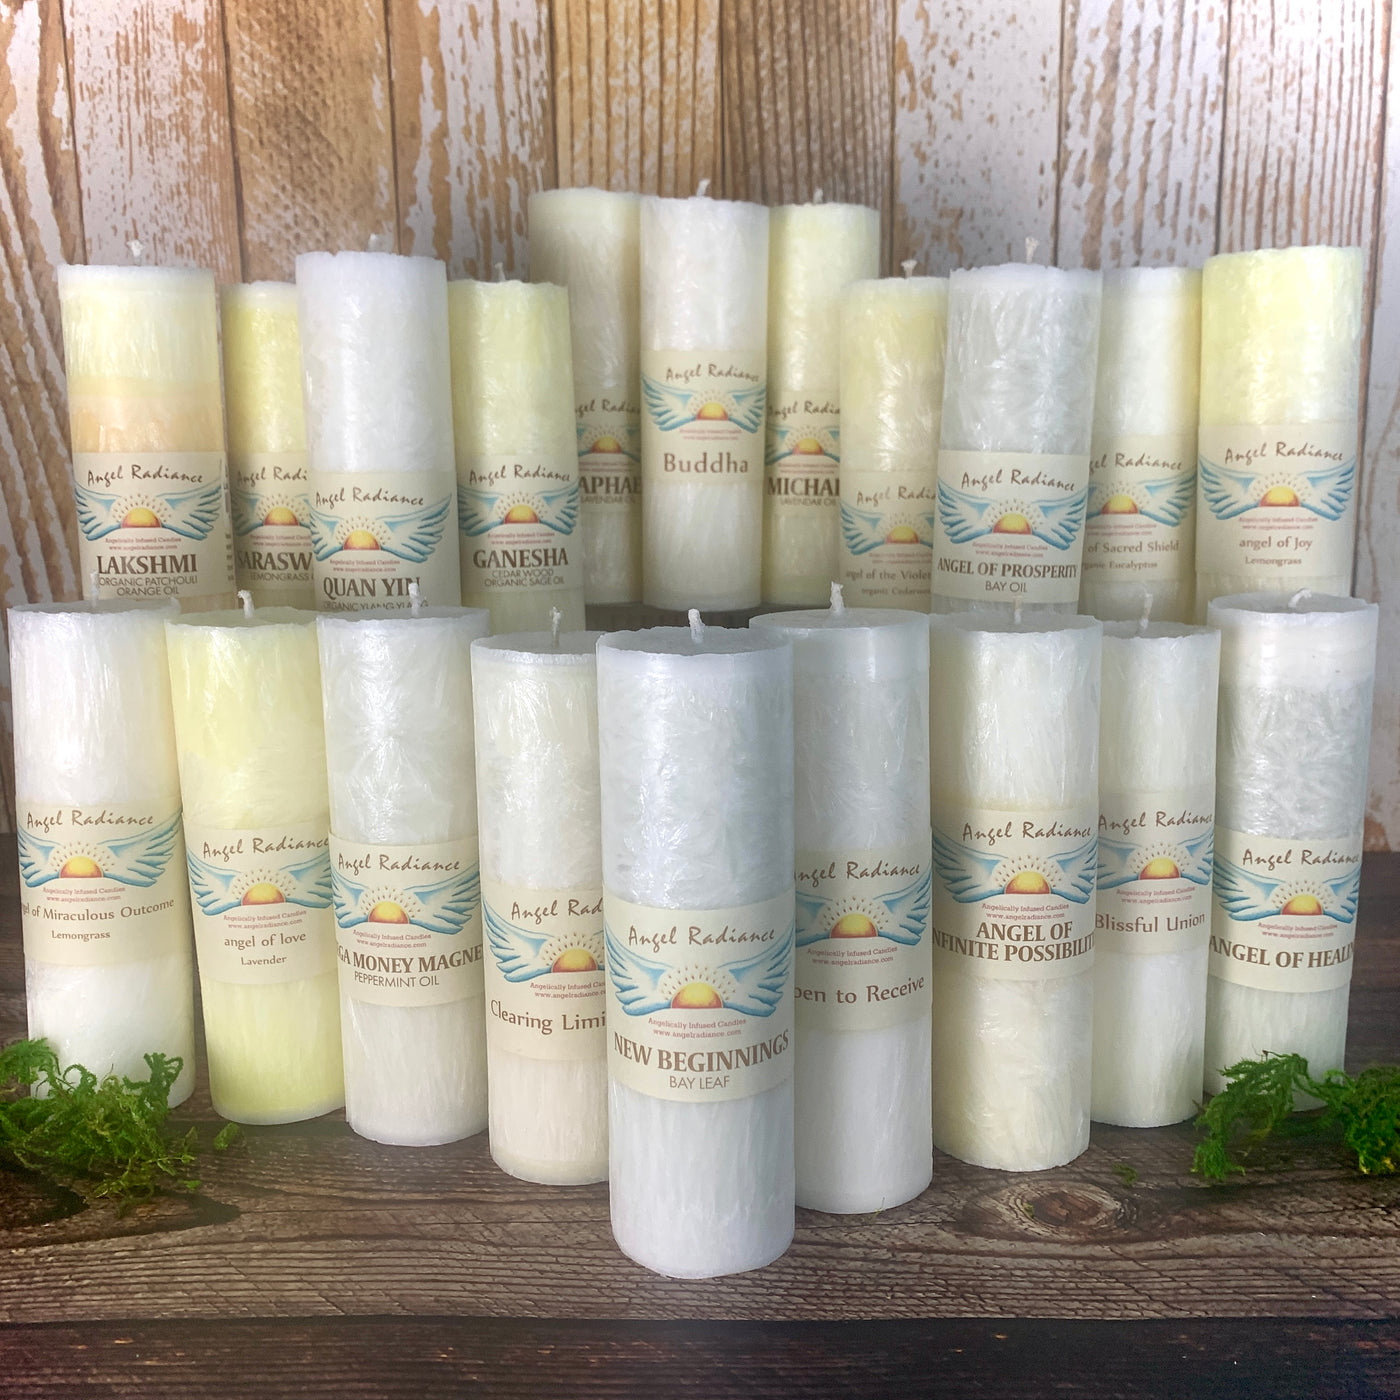 Angel Radiance Candles